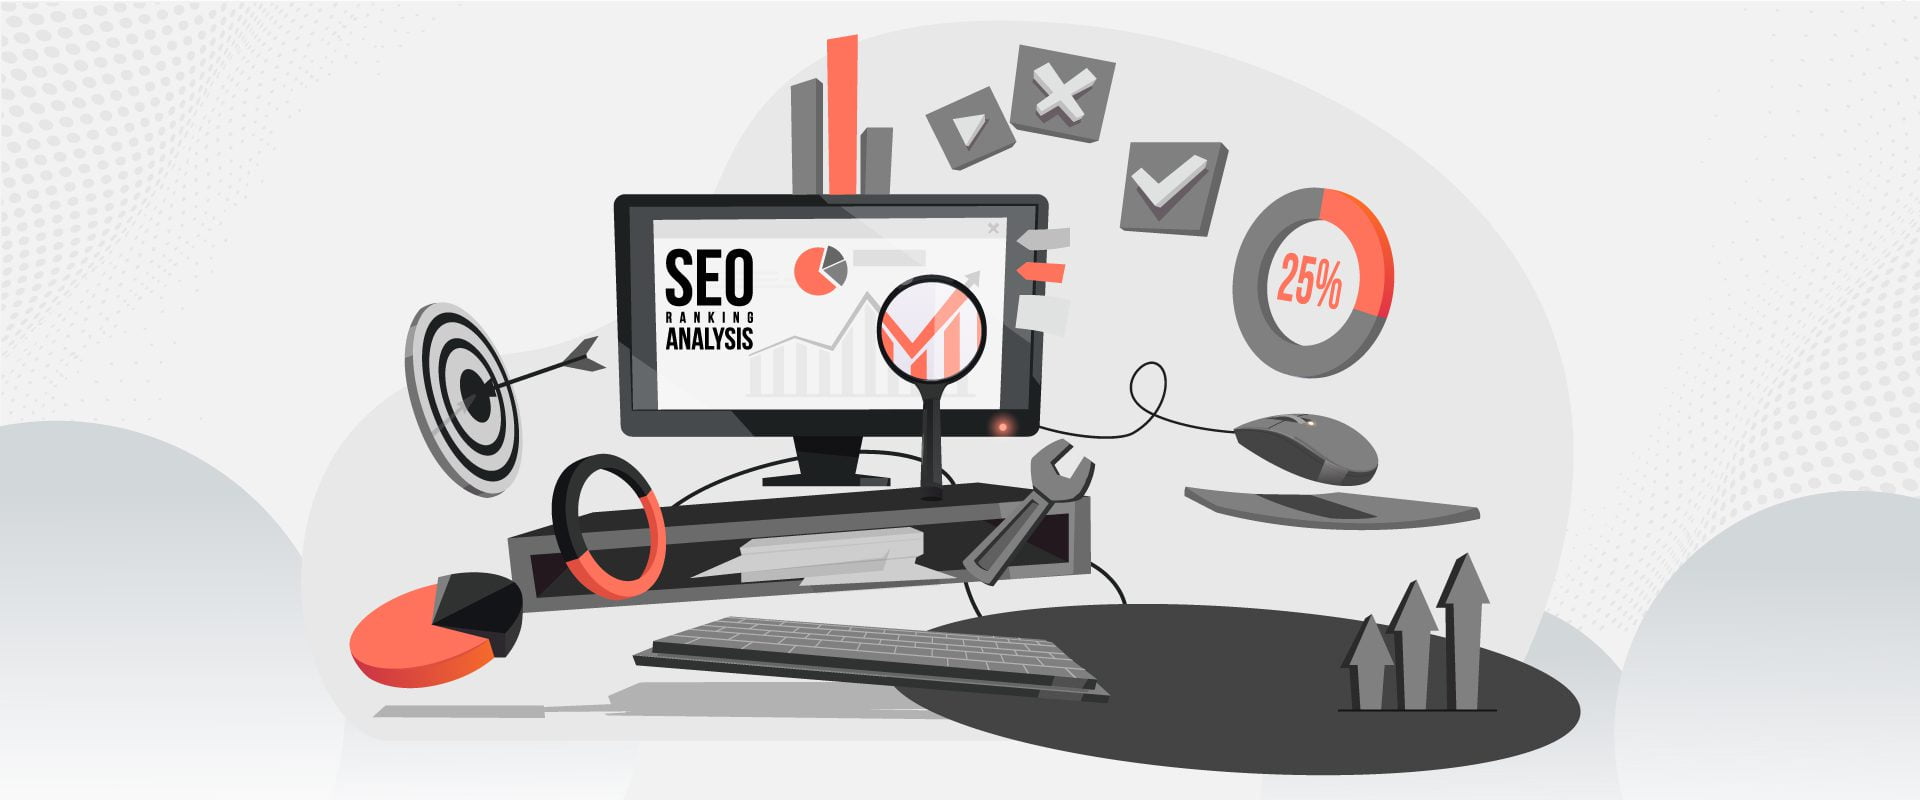 Things to Consider Before Hiring an SEO Agency in Bangladesh